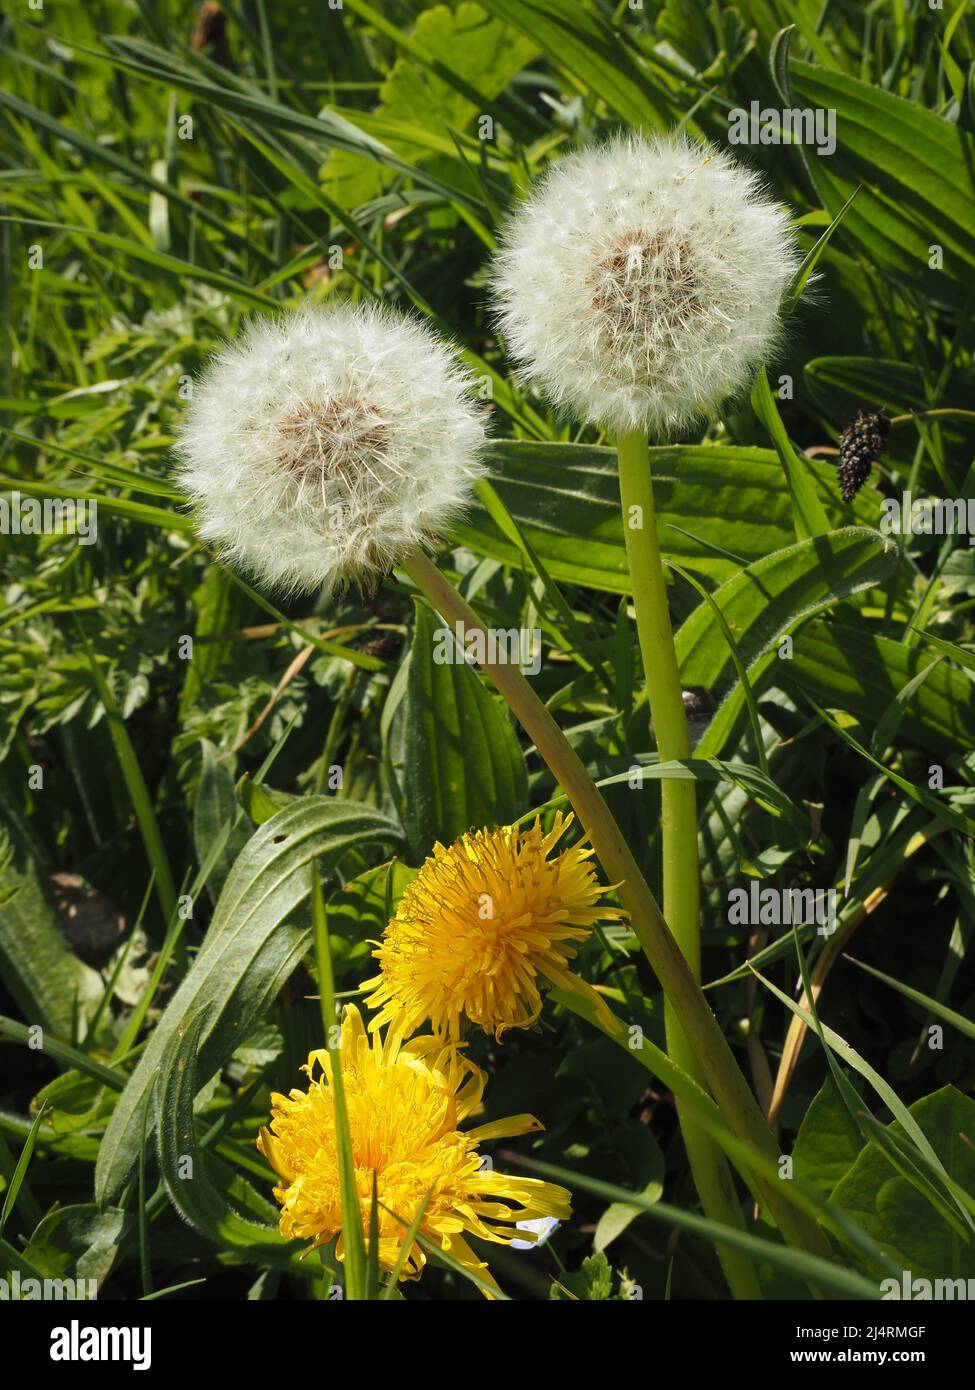 Dandelion (taraxacum official) plant growing in a lawn with seed heads and flowers Stock Photo